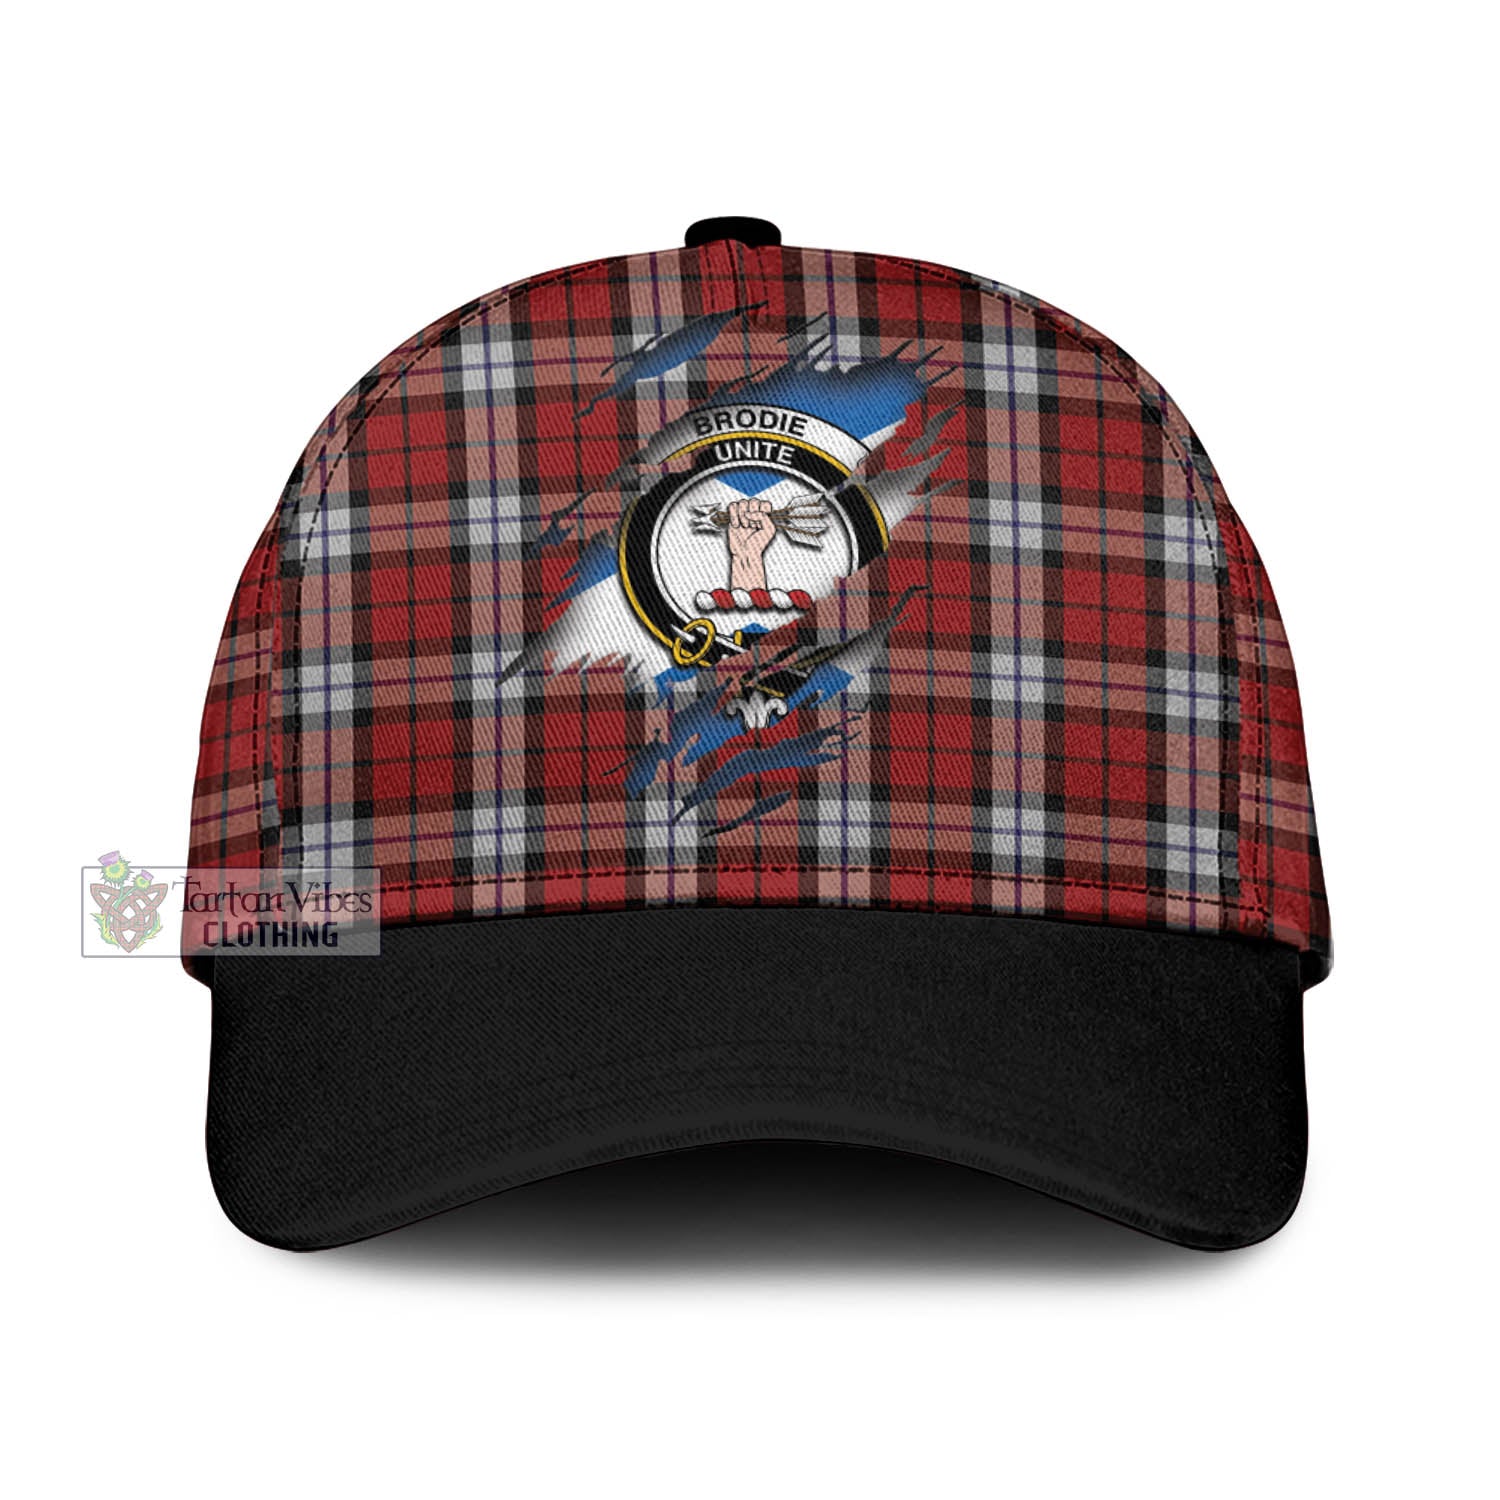 Tartan Vibes Clothing Brodie Dress Tartan Classic Cap with Family Crest In Me Style